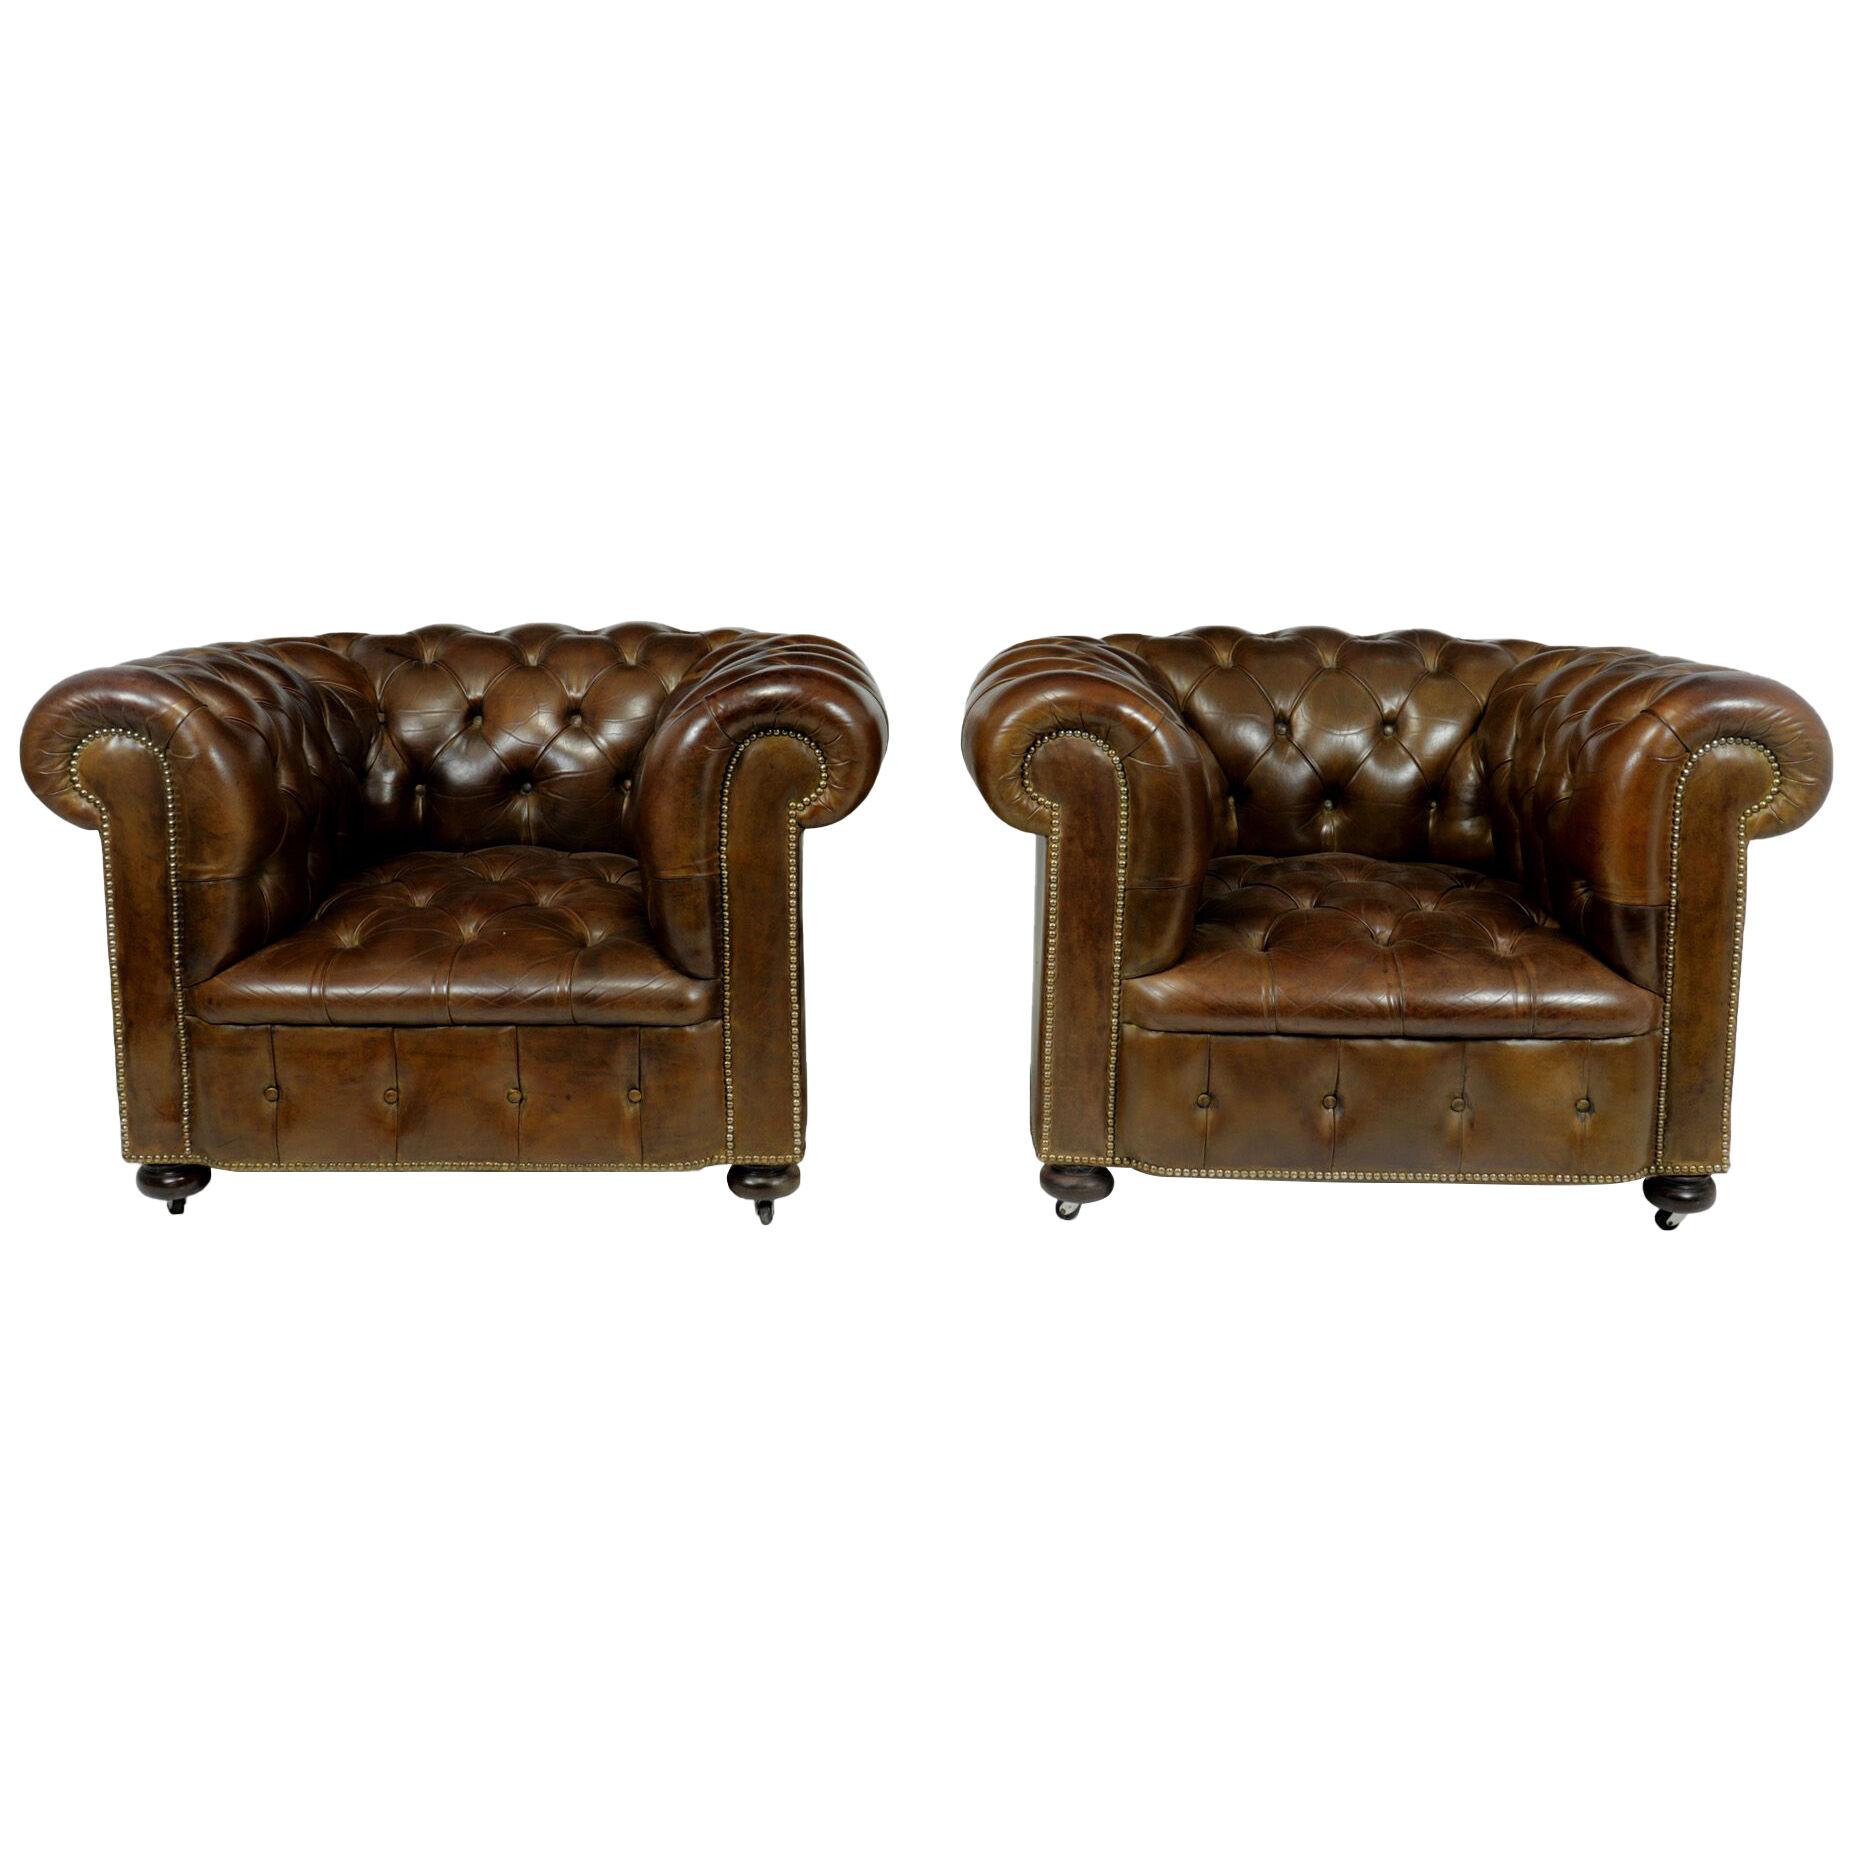 PAIR OF BROWN LEATHER CHESTERFIELD CLUB CHAIRS